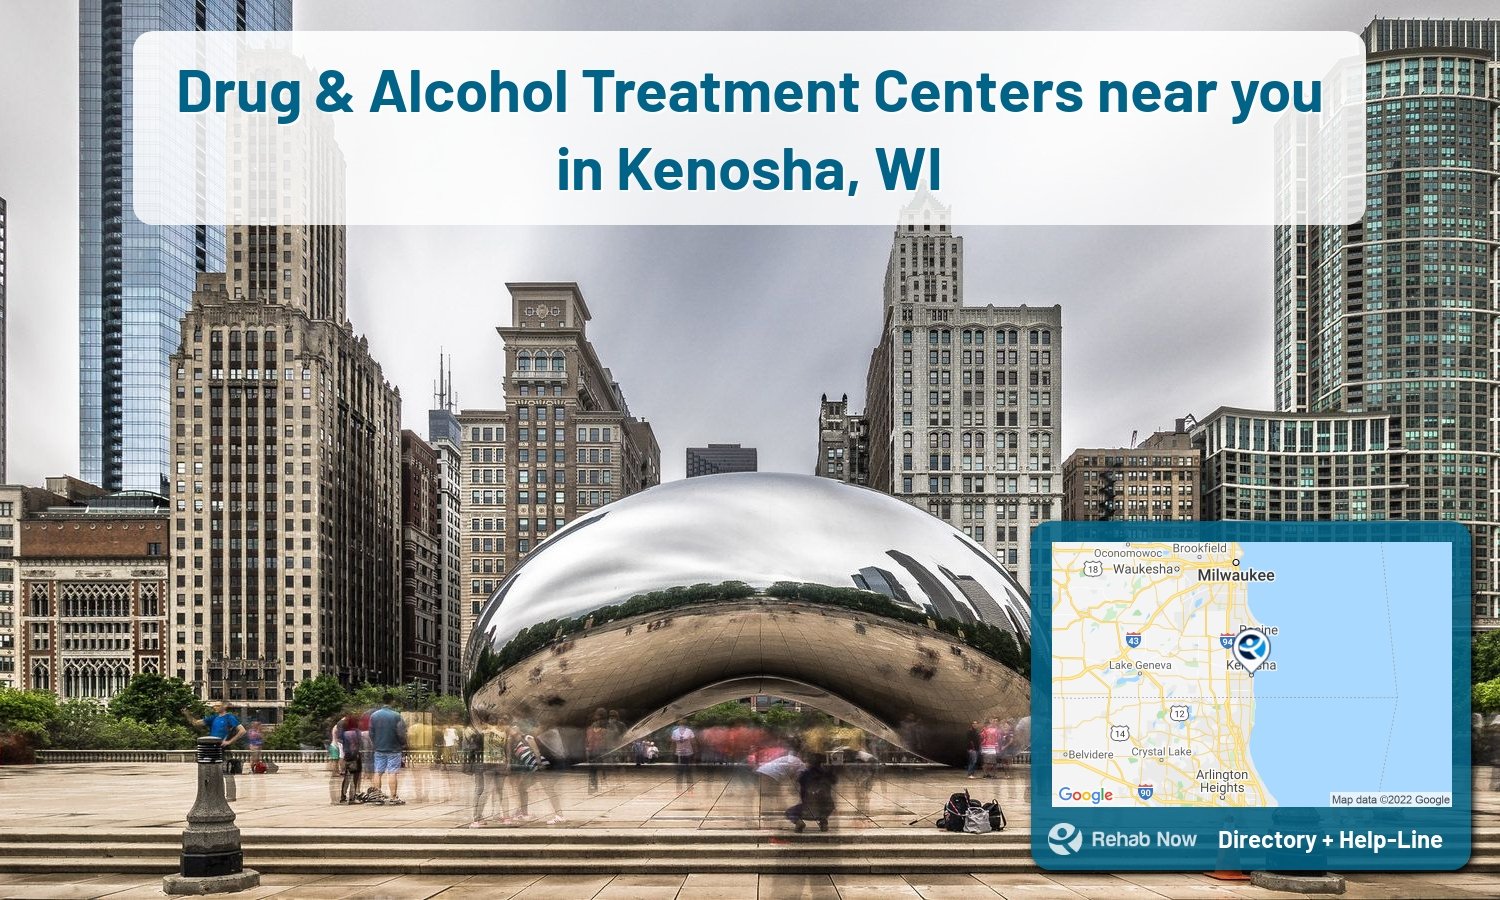 Ready to pick a rehab center in Kenosha? Get off alcohol, opiates, and other drugs, by selecting top drug rehab centers in Wisconsin